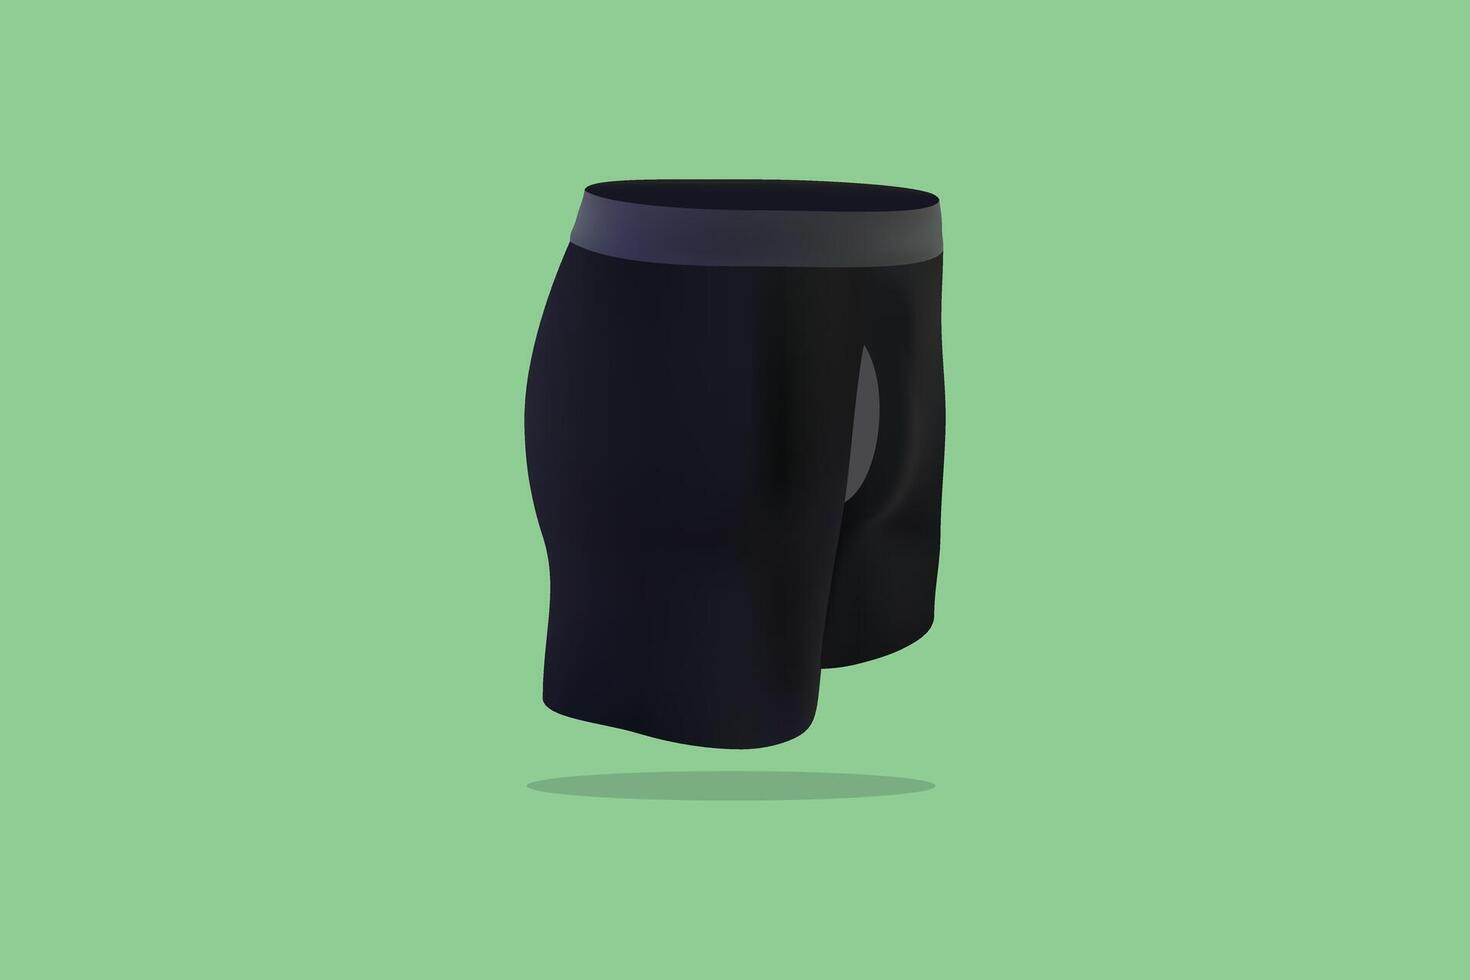 Men Sports Underwear vector illustration. Sports and fashion objects icon concept.